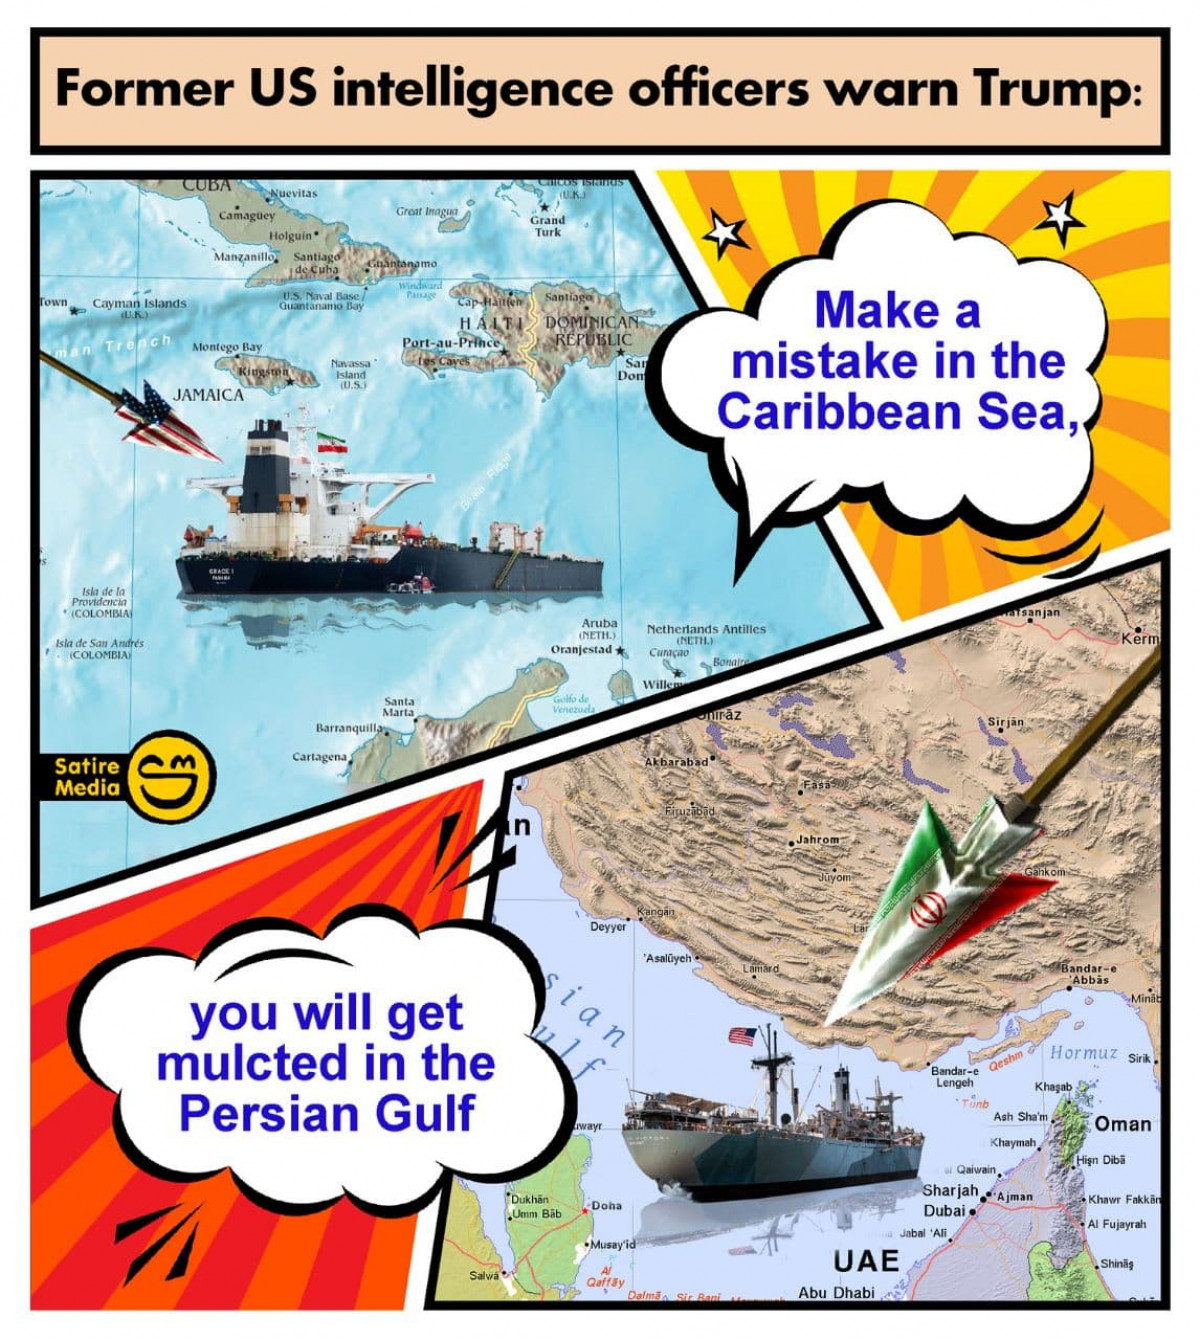 Make a mistake in the Caribbean Sea, you will get mulcted in the Persian Gulf